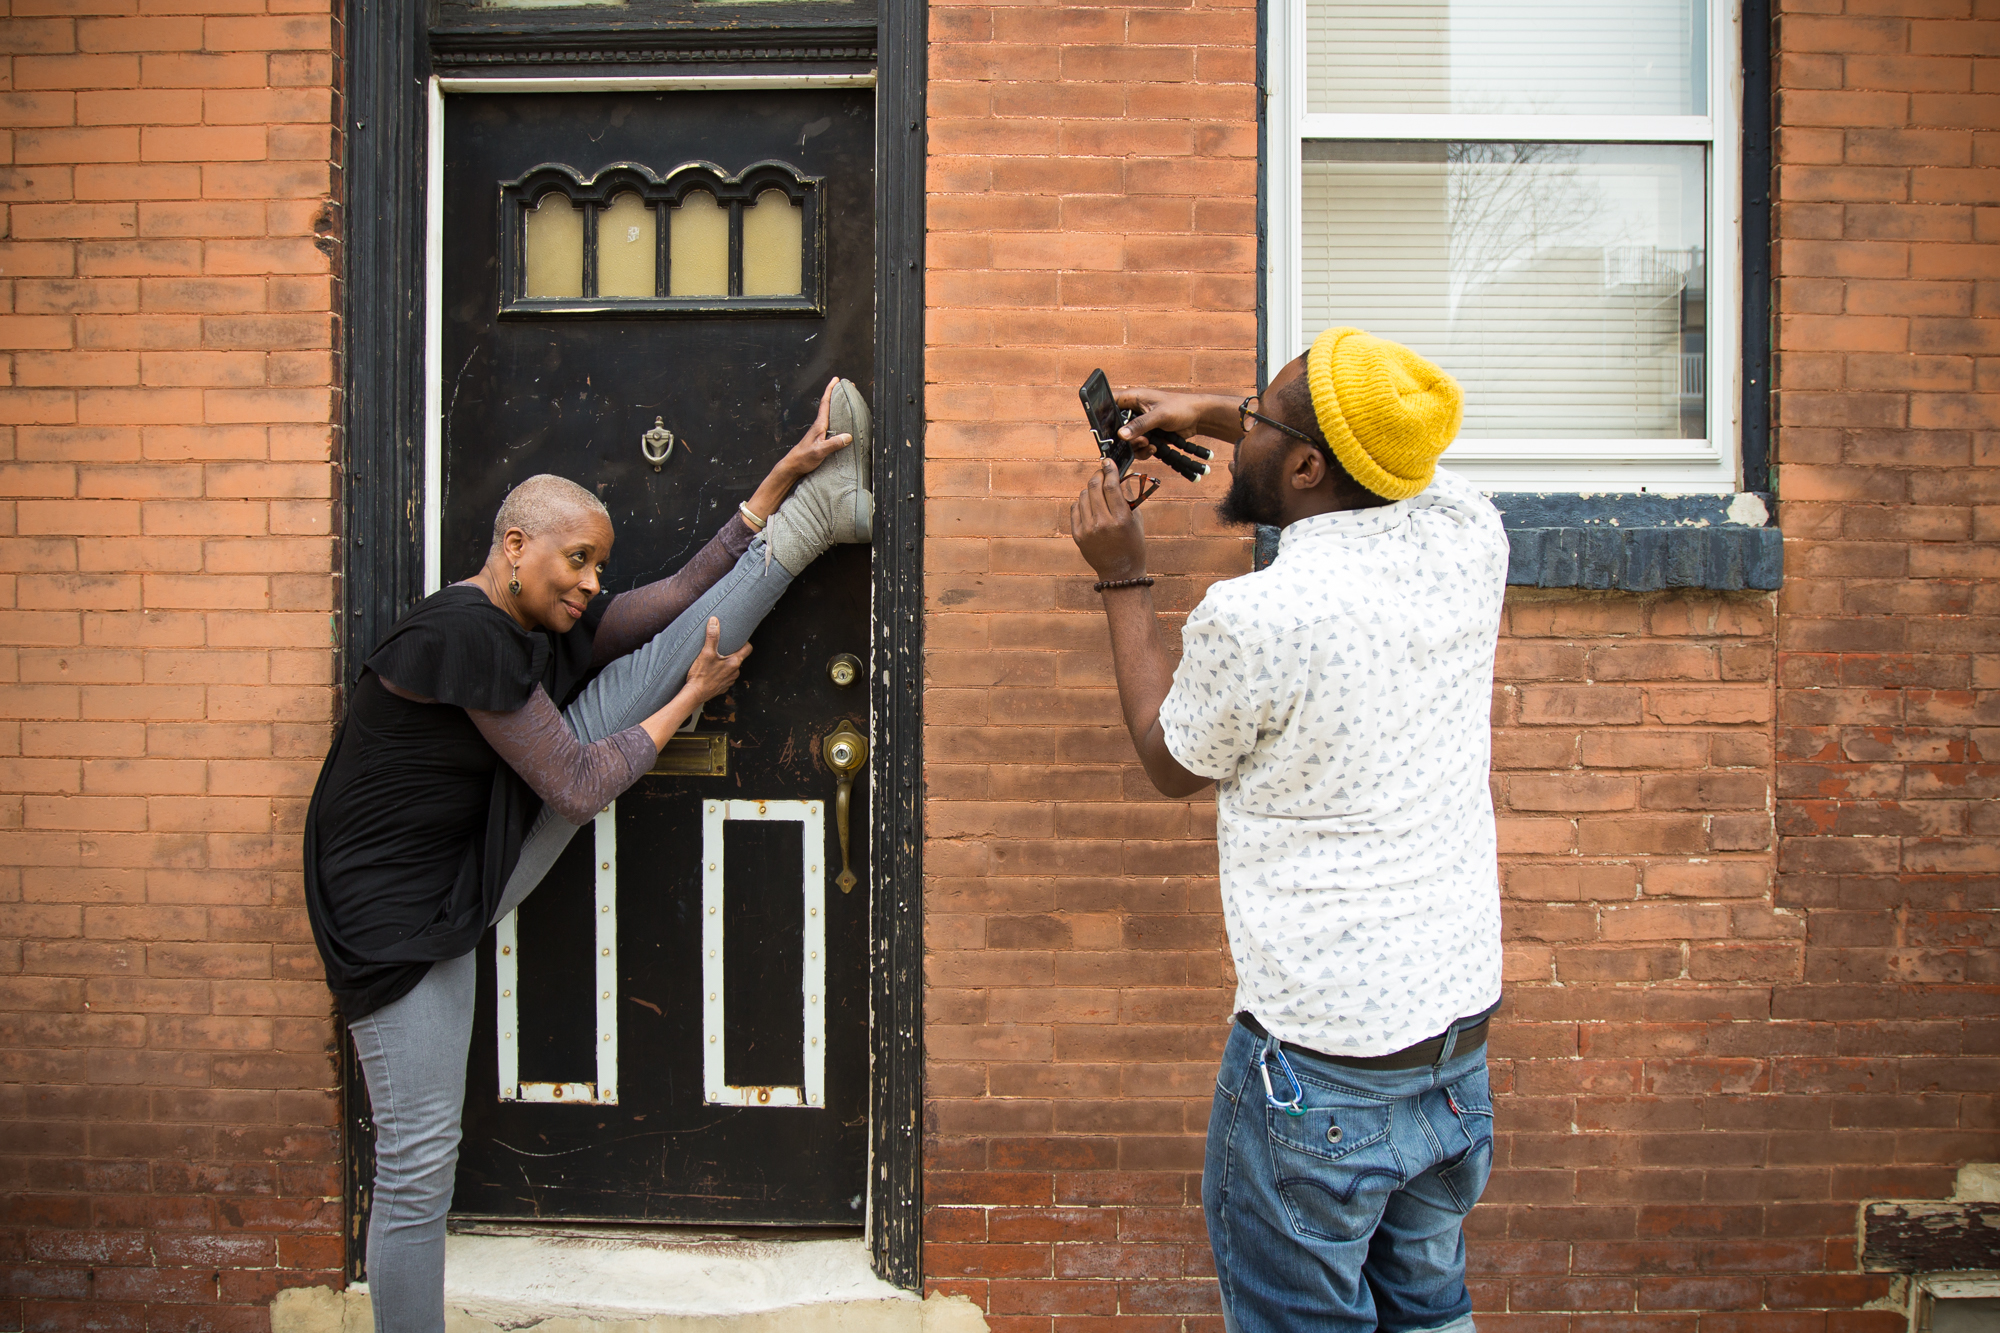  Point Breeze resident Rhonda Moore poses for photos during the third and final workshop of The Redline Project on March 12, 2016.&nbsp;Moore teaches Ballroom dancing to elementary students in Philadelphia and is also a dance faculty member at Temple